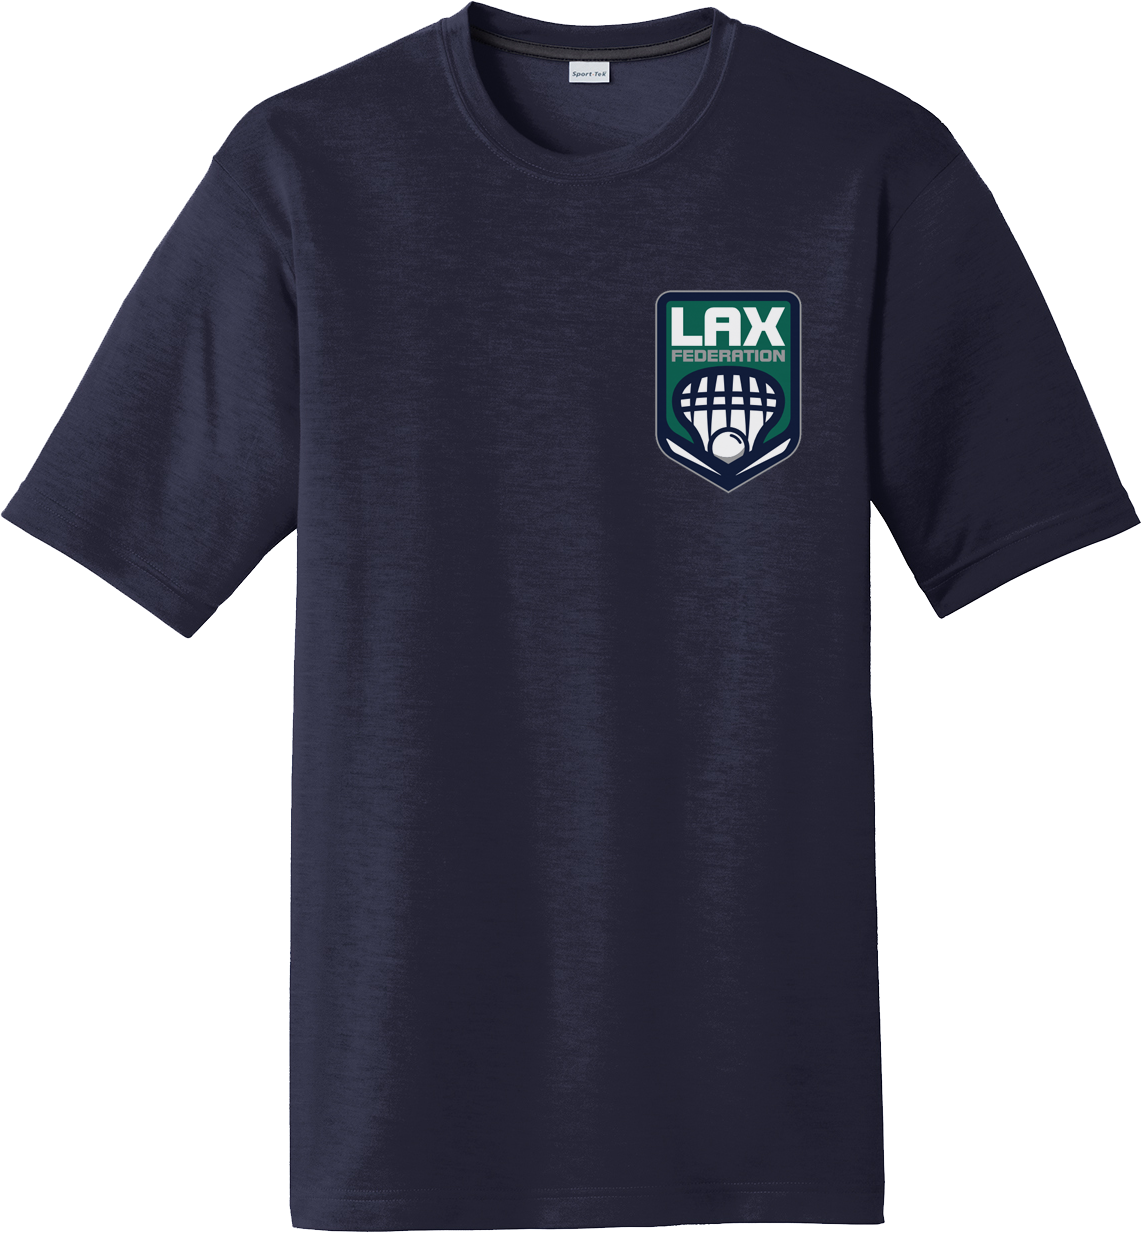 Lax Fed Navy CottonTouch Performance T-Shirt